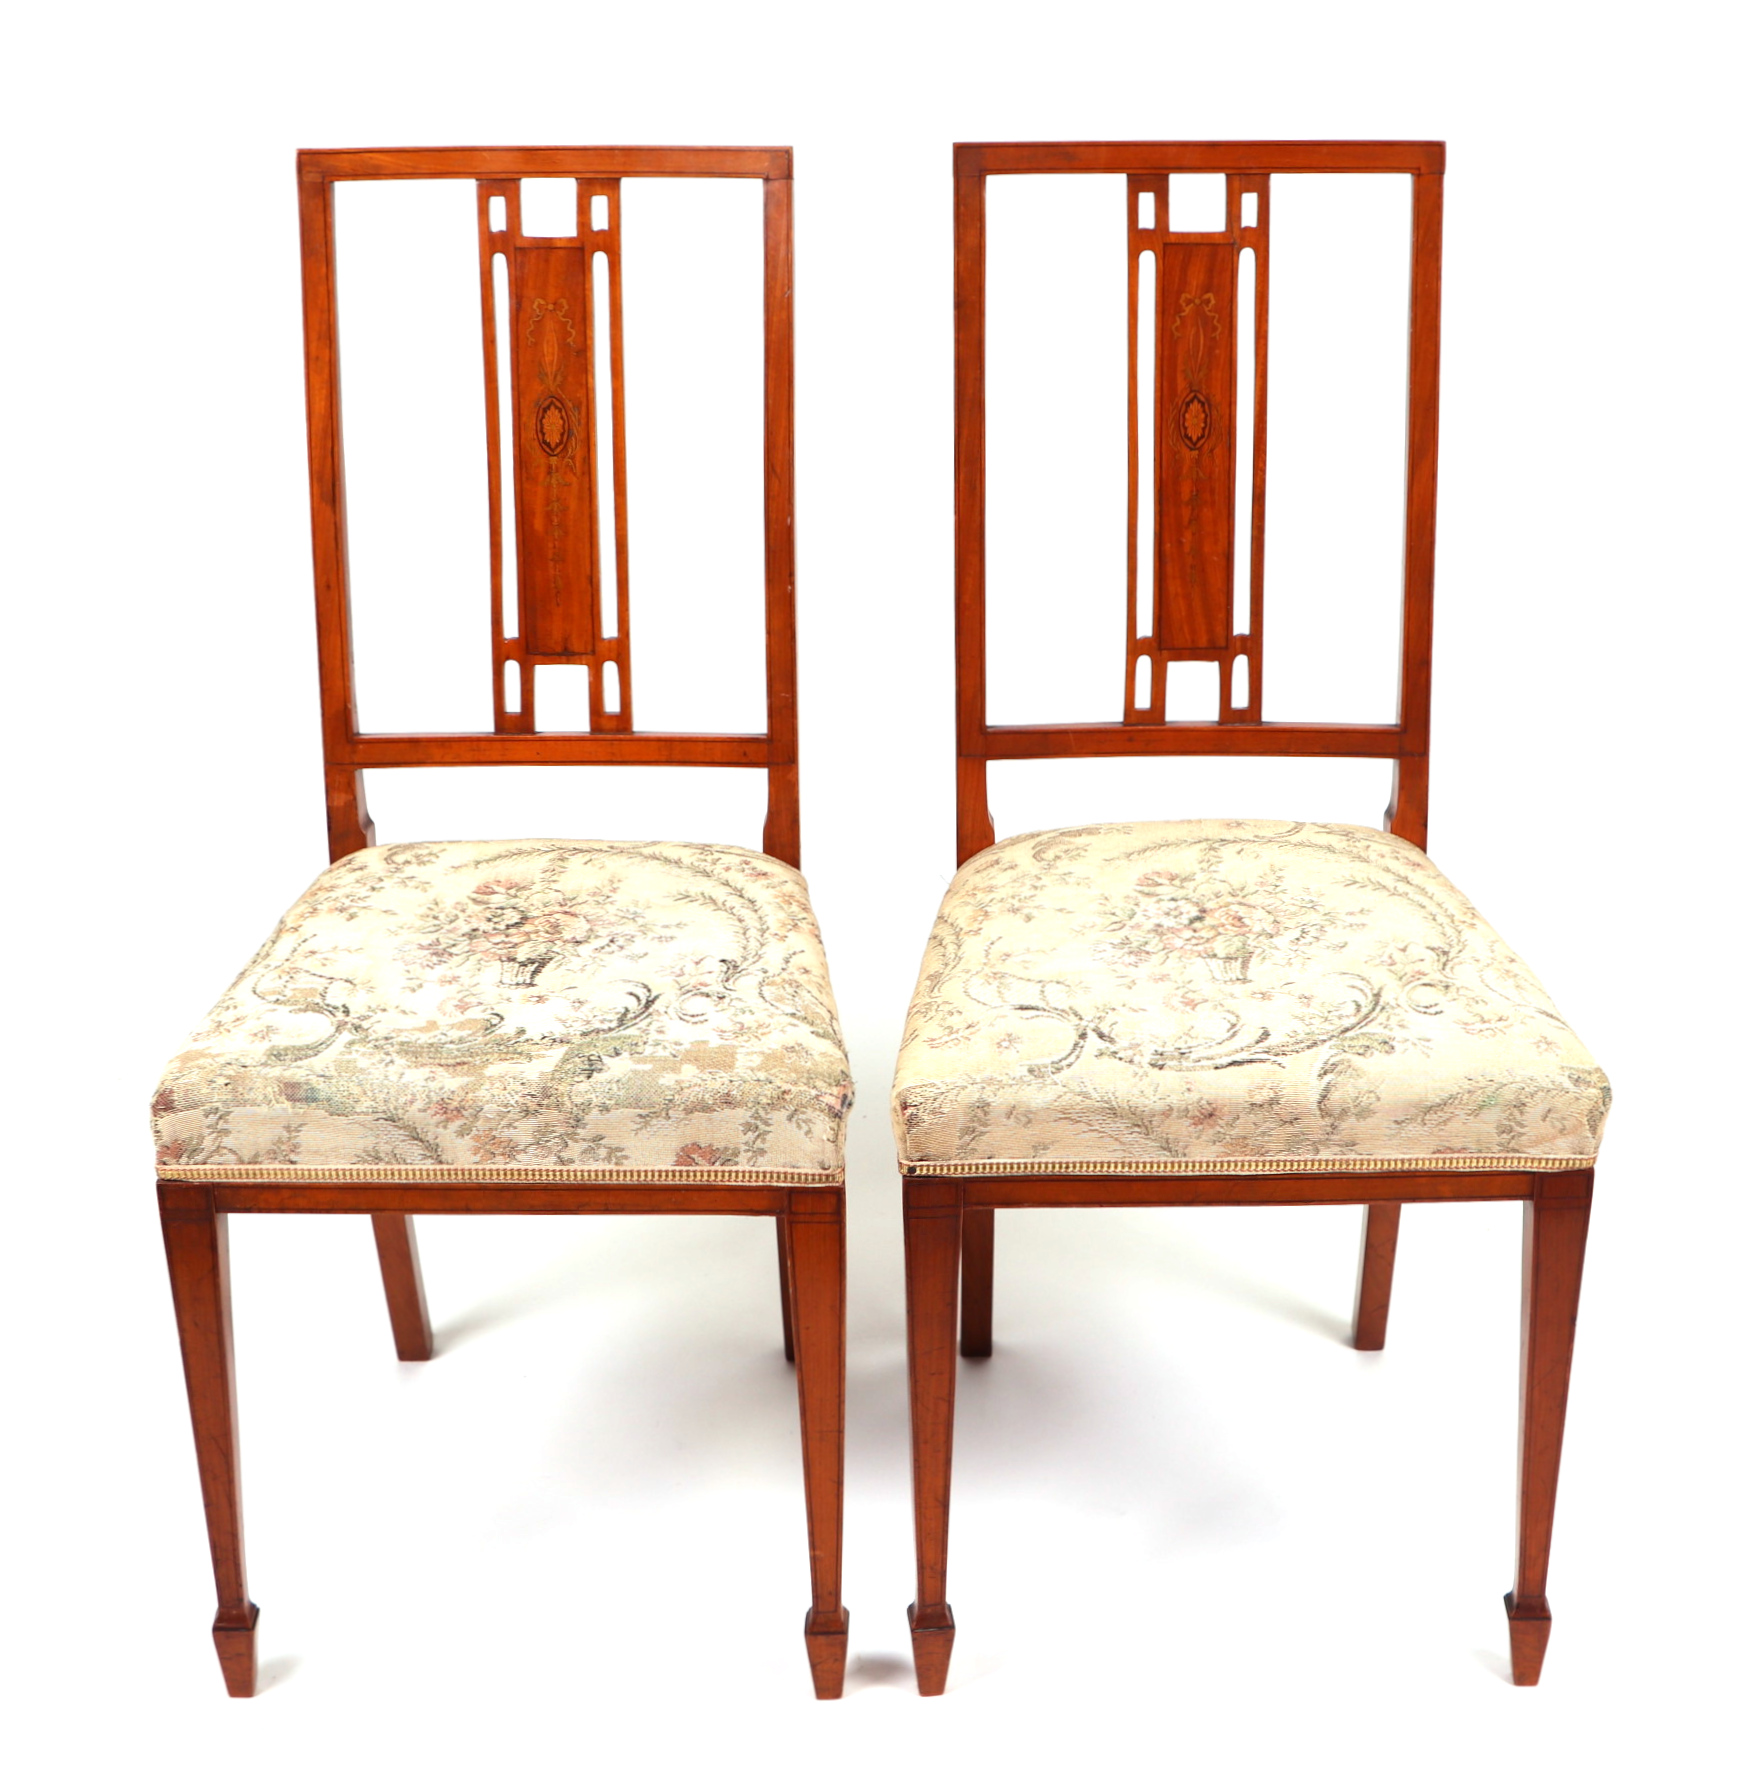 A pair of late 19th century inlaid satinwood occasional chairs with upholstered seats, on square